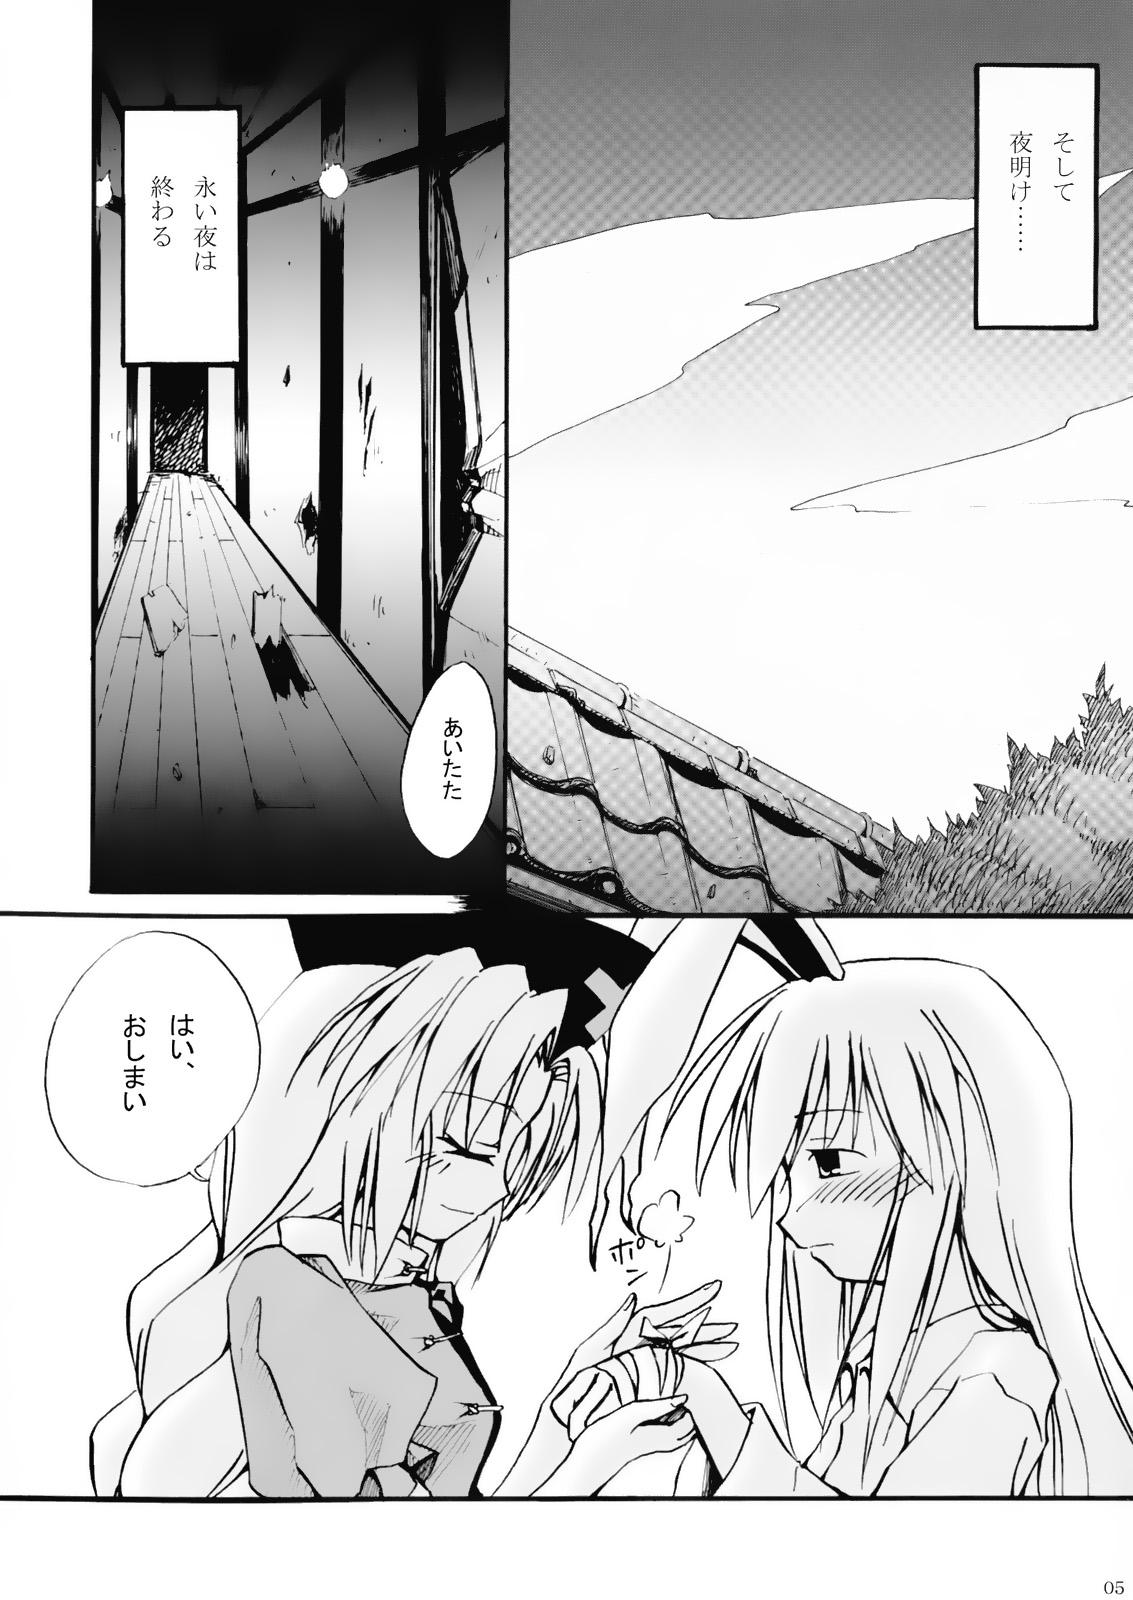 Watersports 永夜 - Touhou project Cum Eating - Page 4